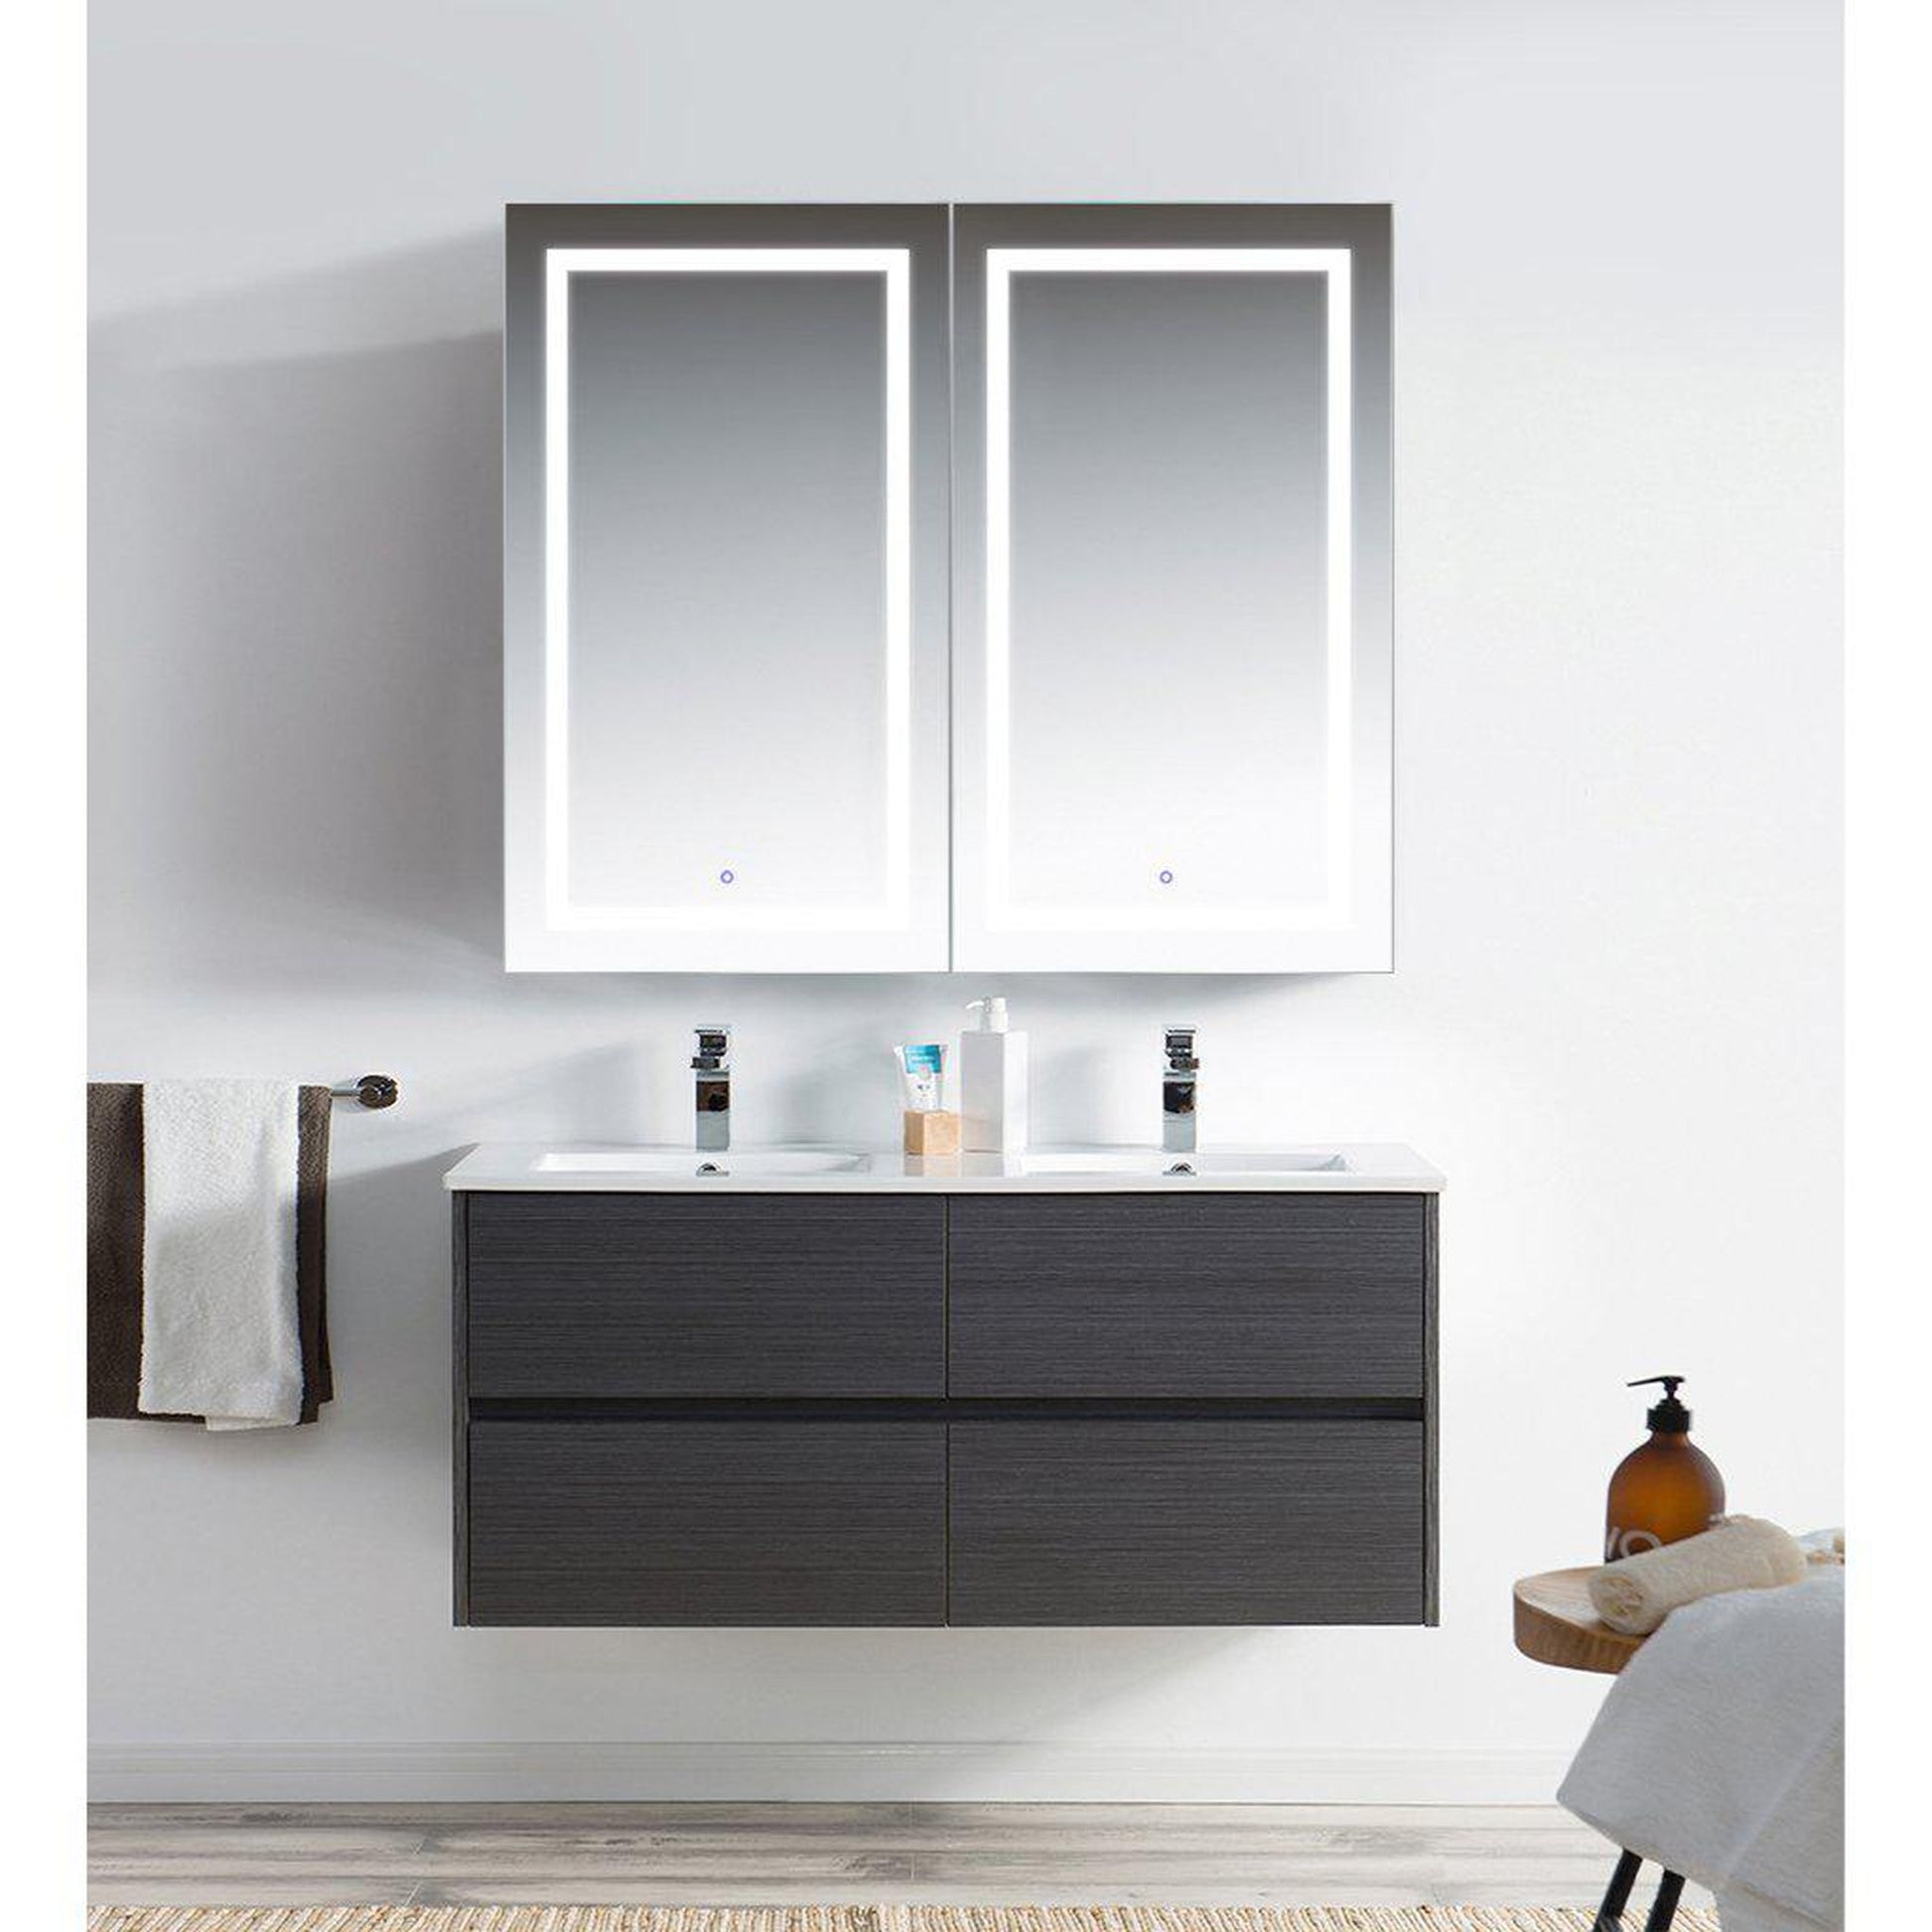 Krugg Reflections Svange 48" x 42" 5000K Double Dual Opening Recessed/Surface-Mount Illuminated Silver Backed LED Medicine Cabinet Mirror With Built-in Defogger, Dimmer and Electrical Outlet